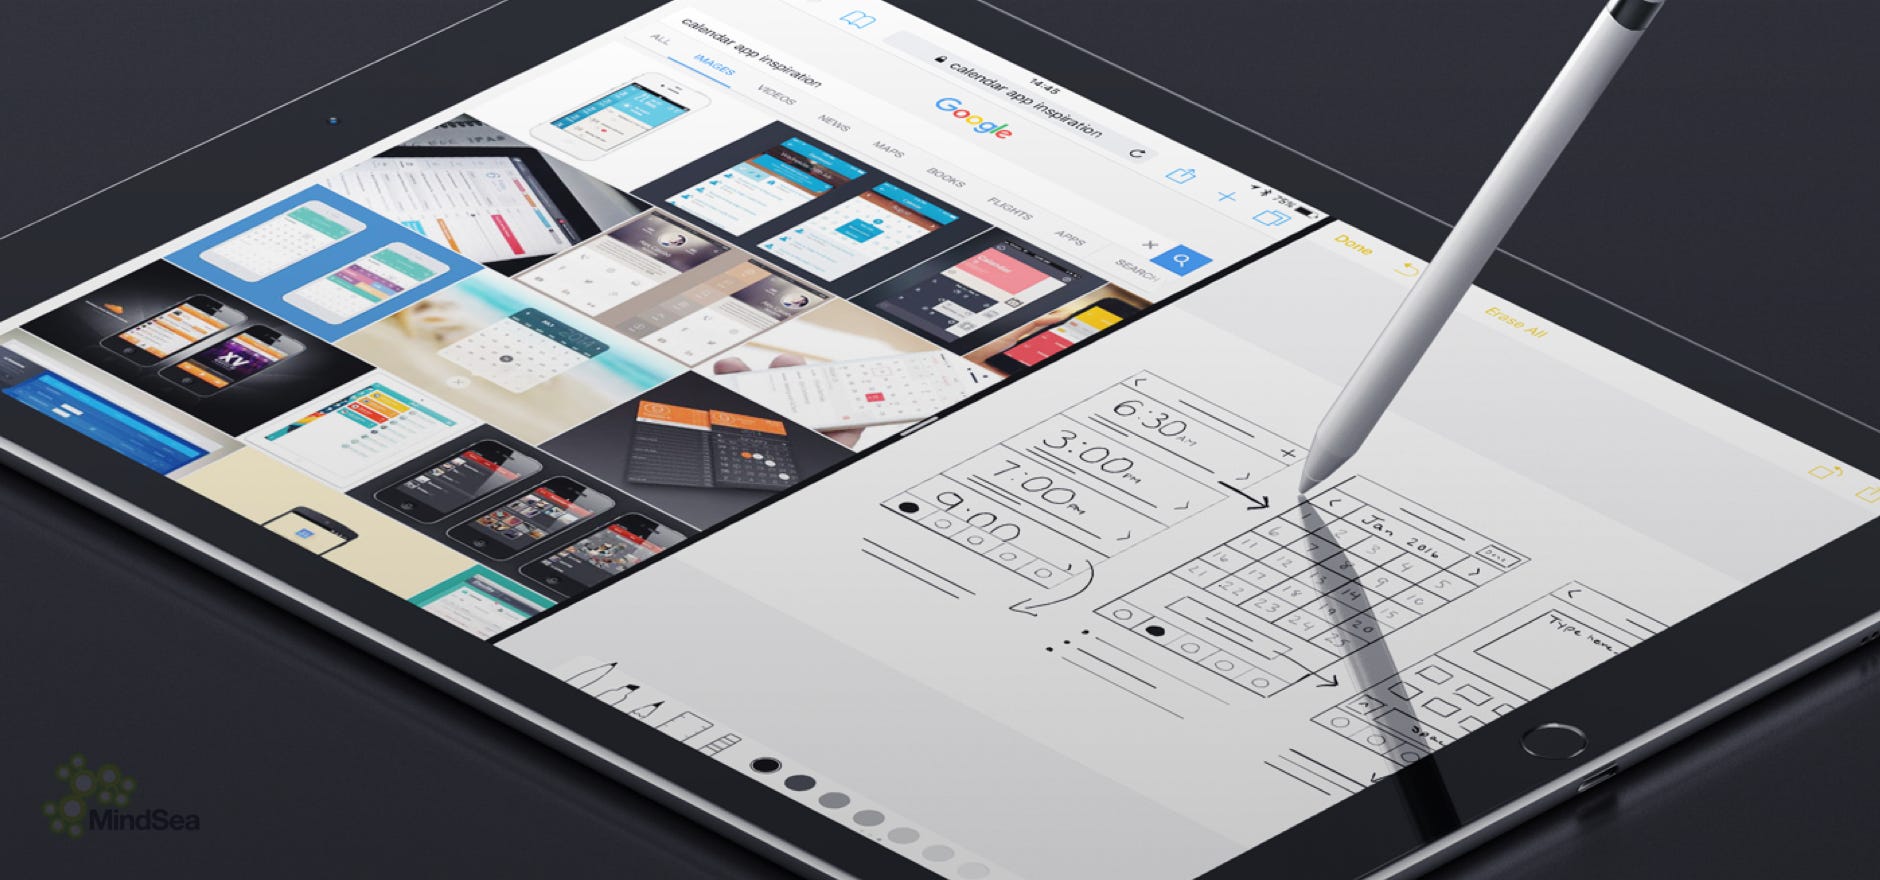 Furniture Design App Ipad - Top 10 apps for architects & designers